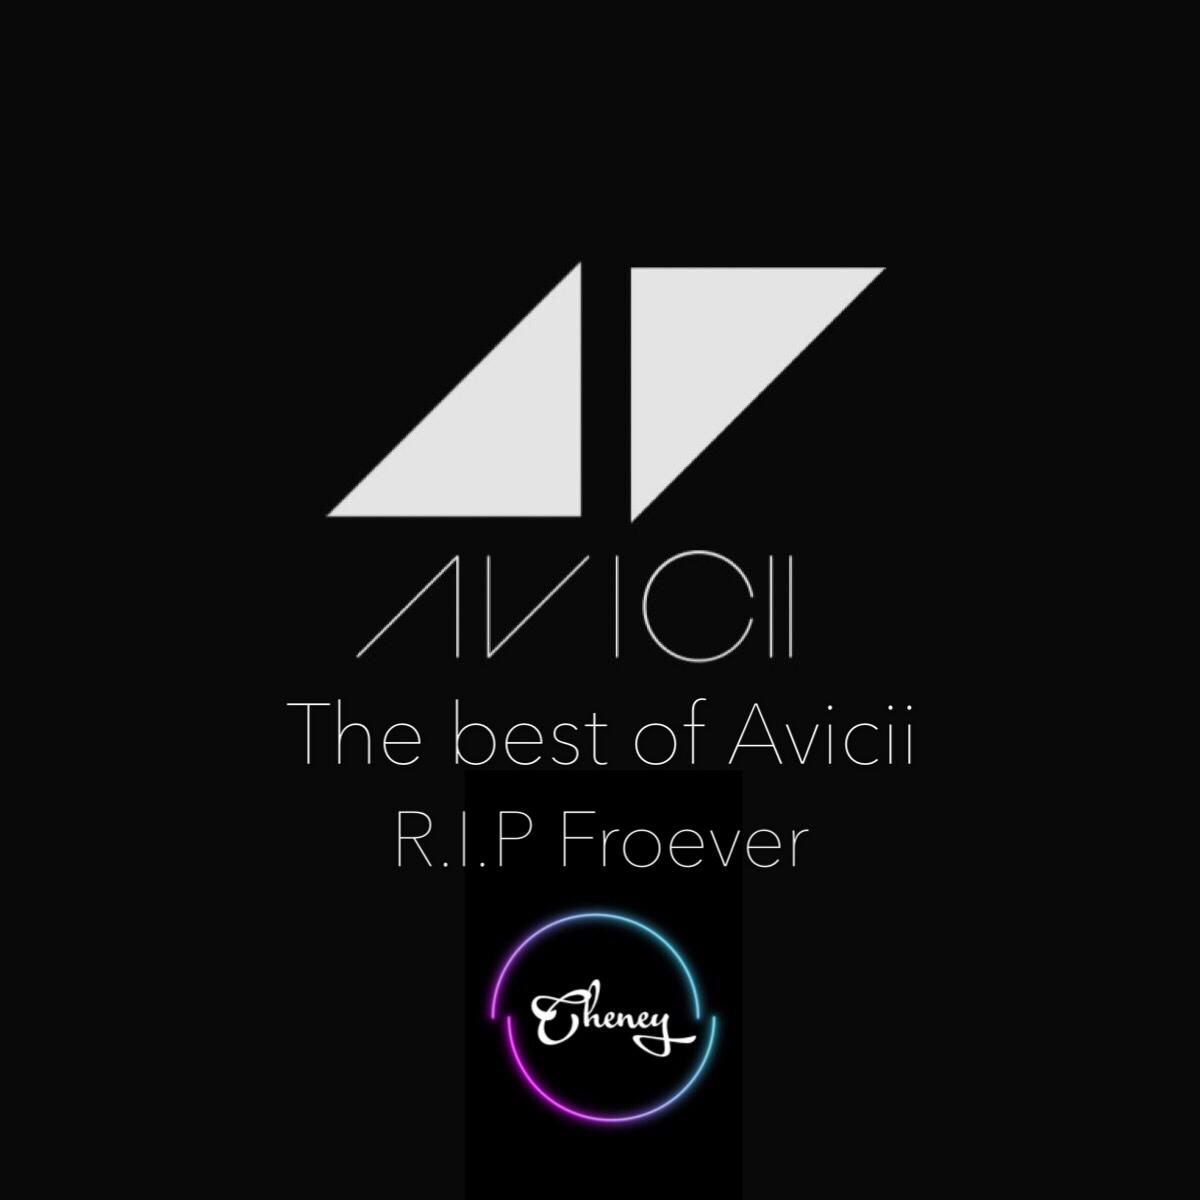 The  best  of  Avicii   R. I. P  Froever